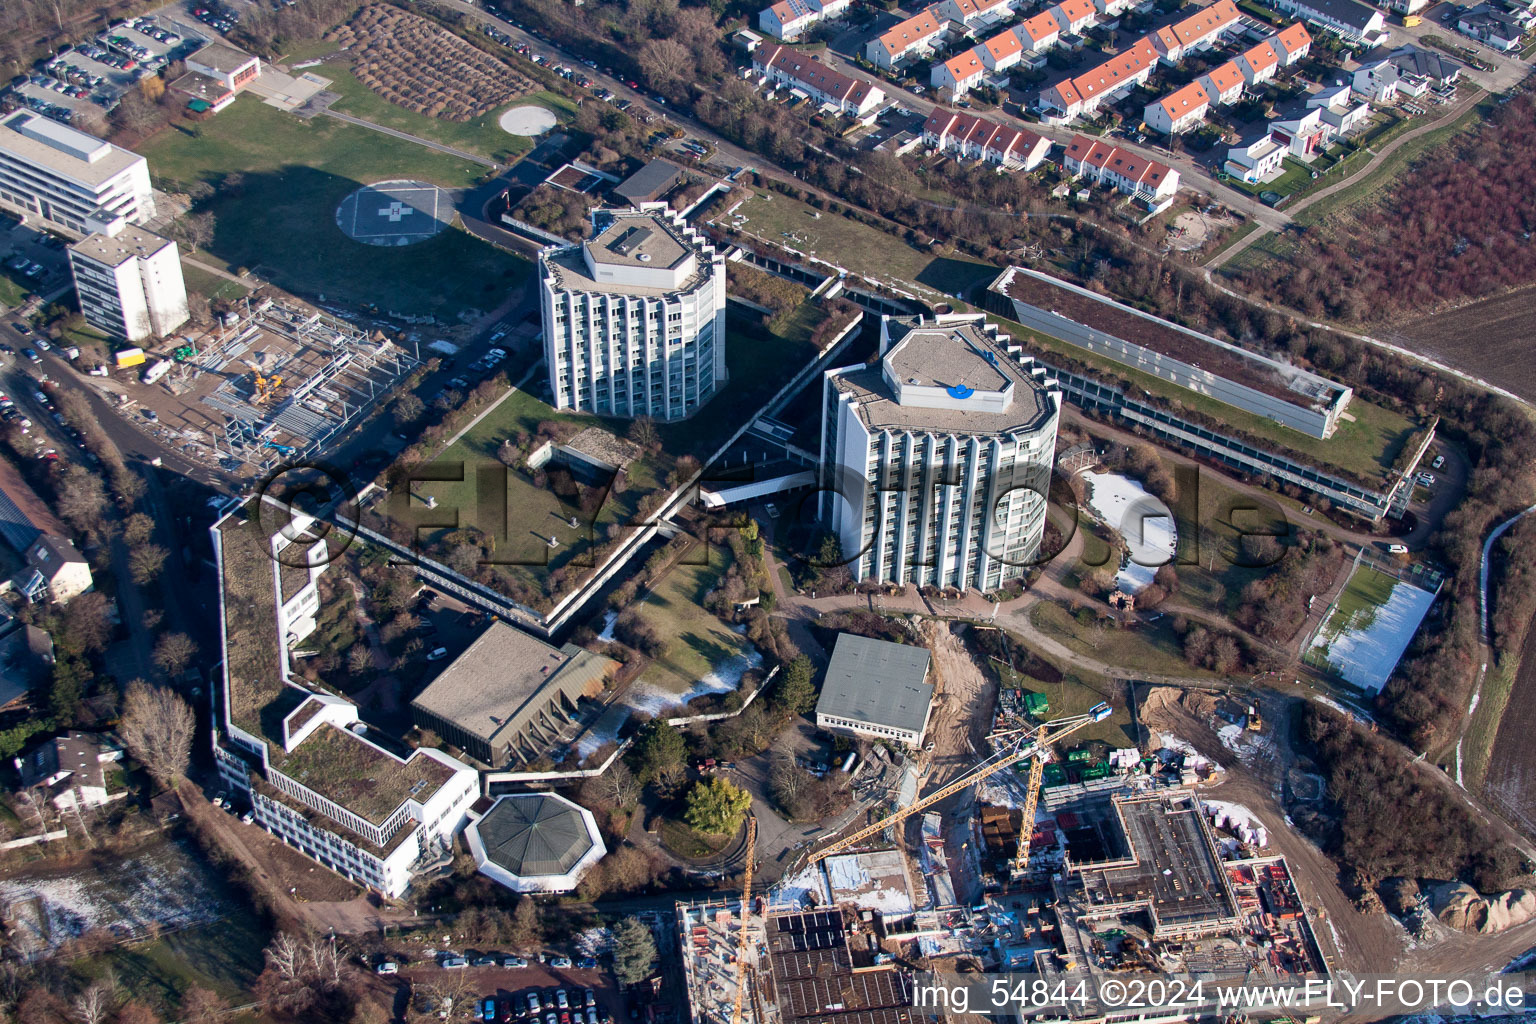 Aerial view of Hospital grounds of the Clinic BG Klinik Ludwigshafen in the district Oggersheim in Ludwigshafen am Rhein in the state Rhineland-Palatinate